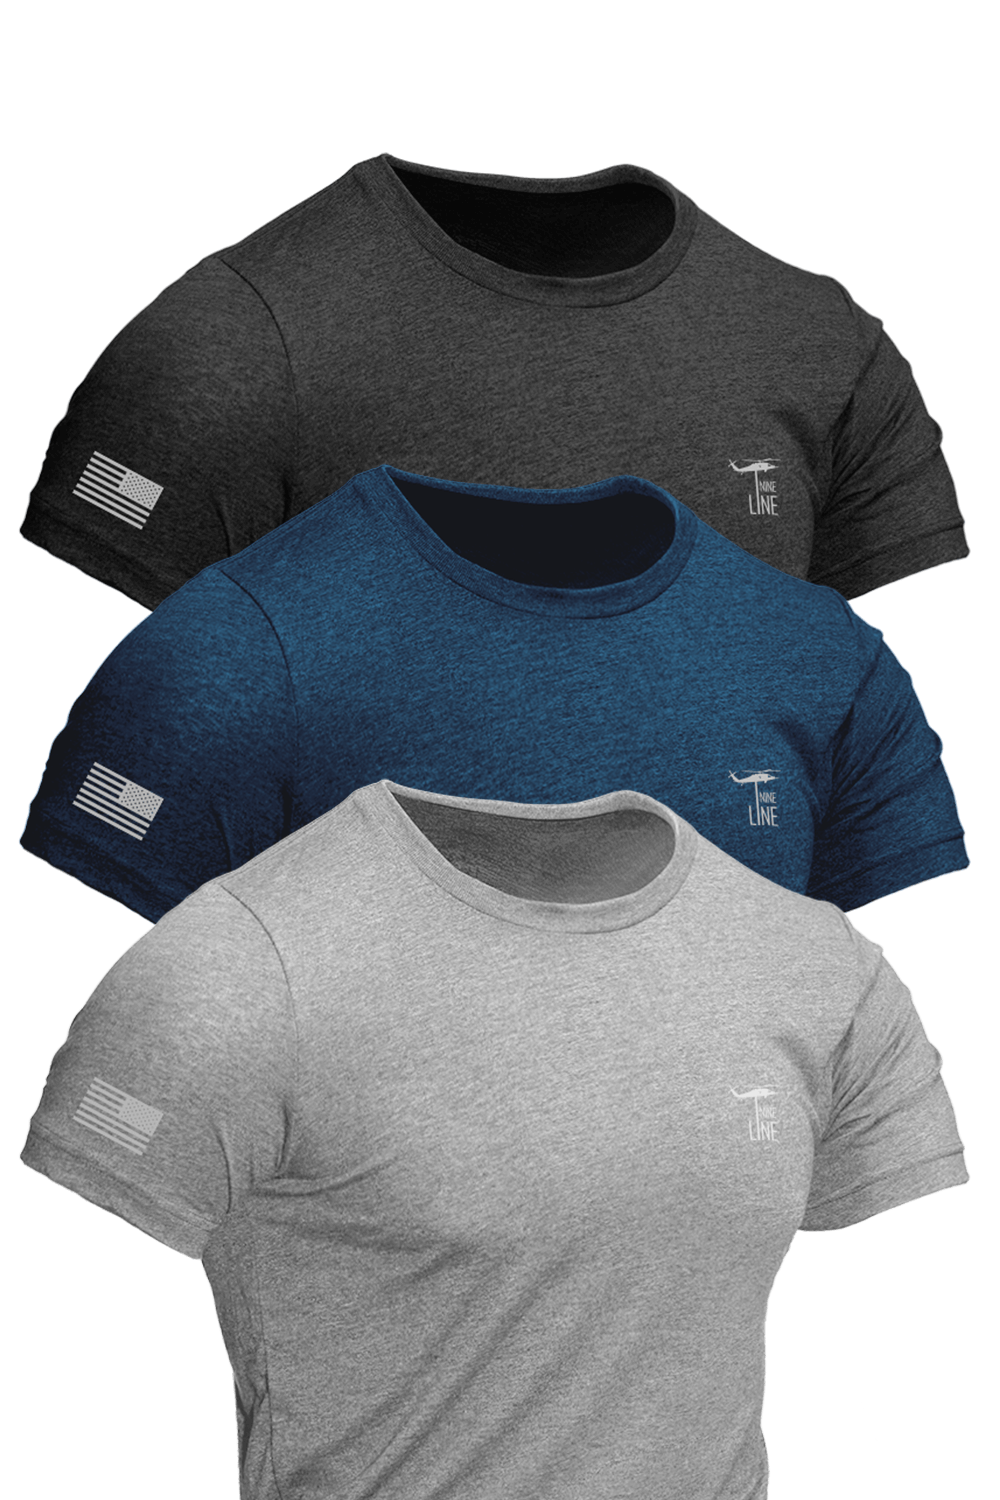 Reflective Ink Athletic T-Shirt - Standard Issue Pack [3 Shirts] - Nine Line Apparel